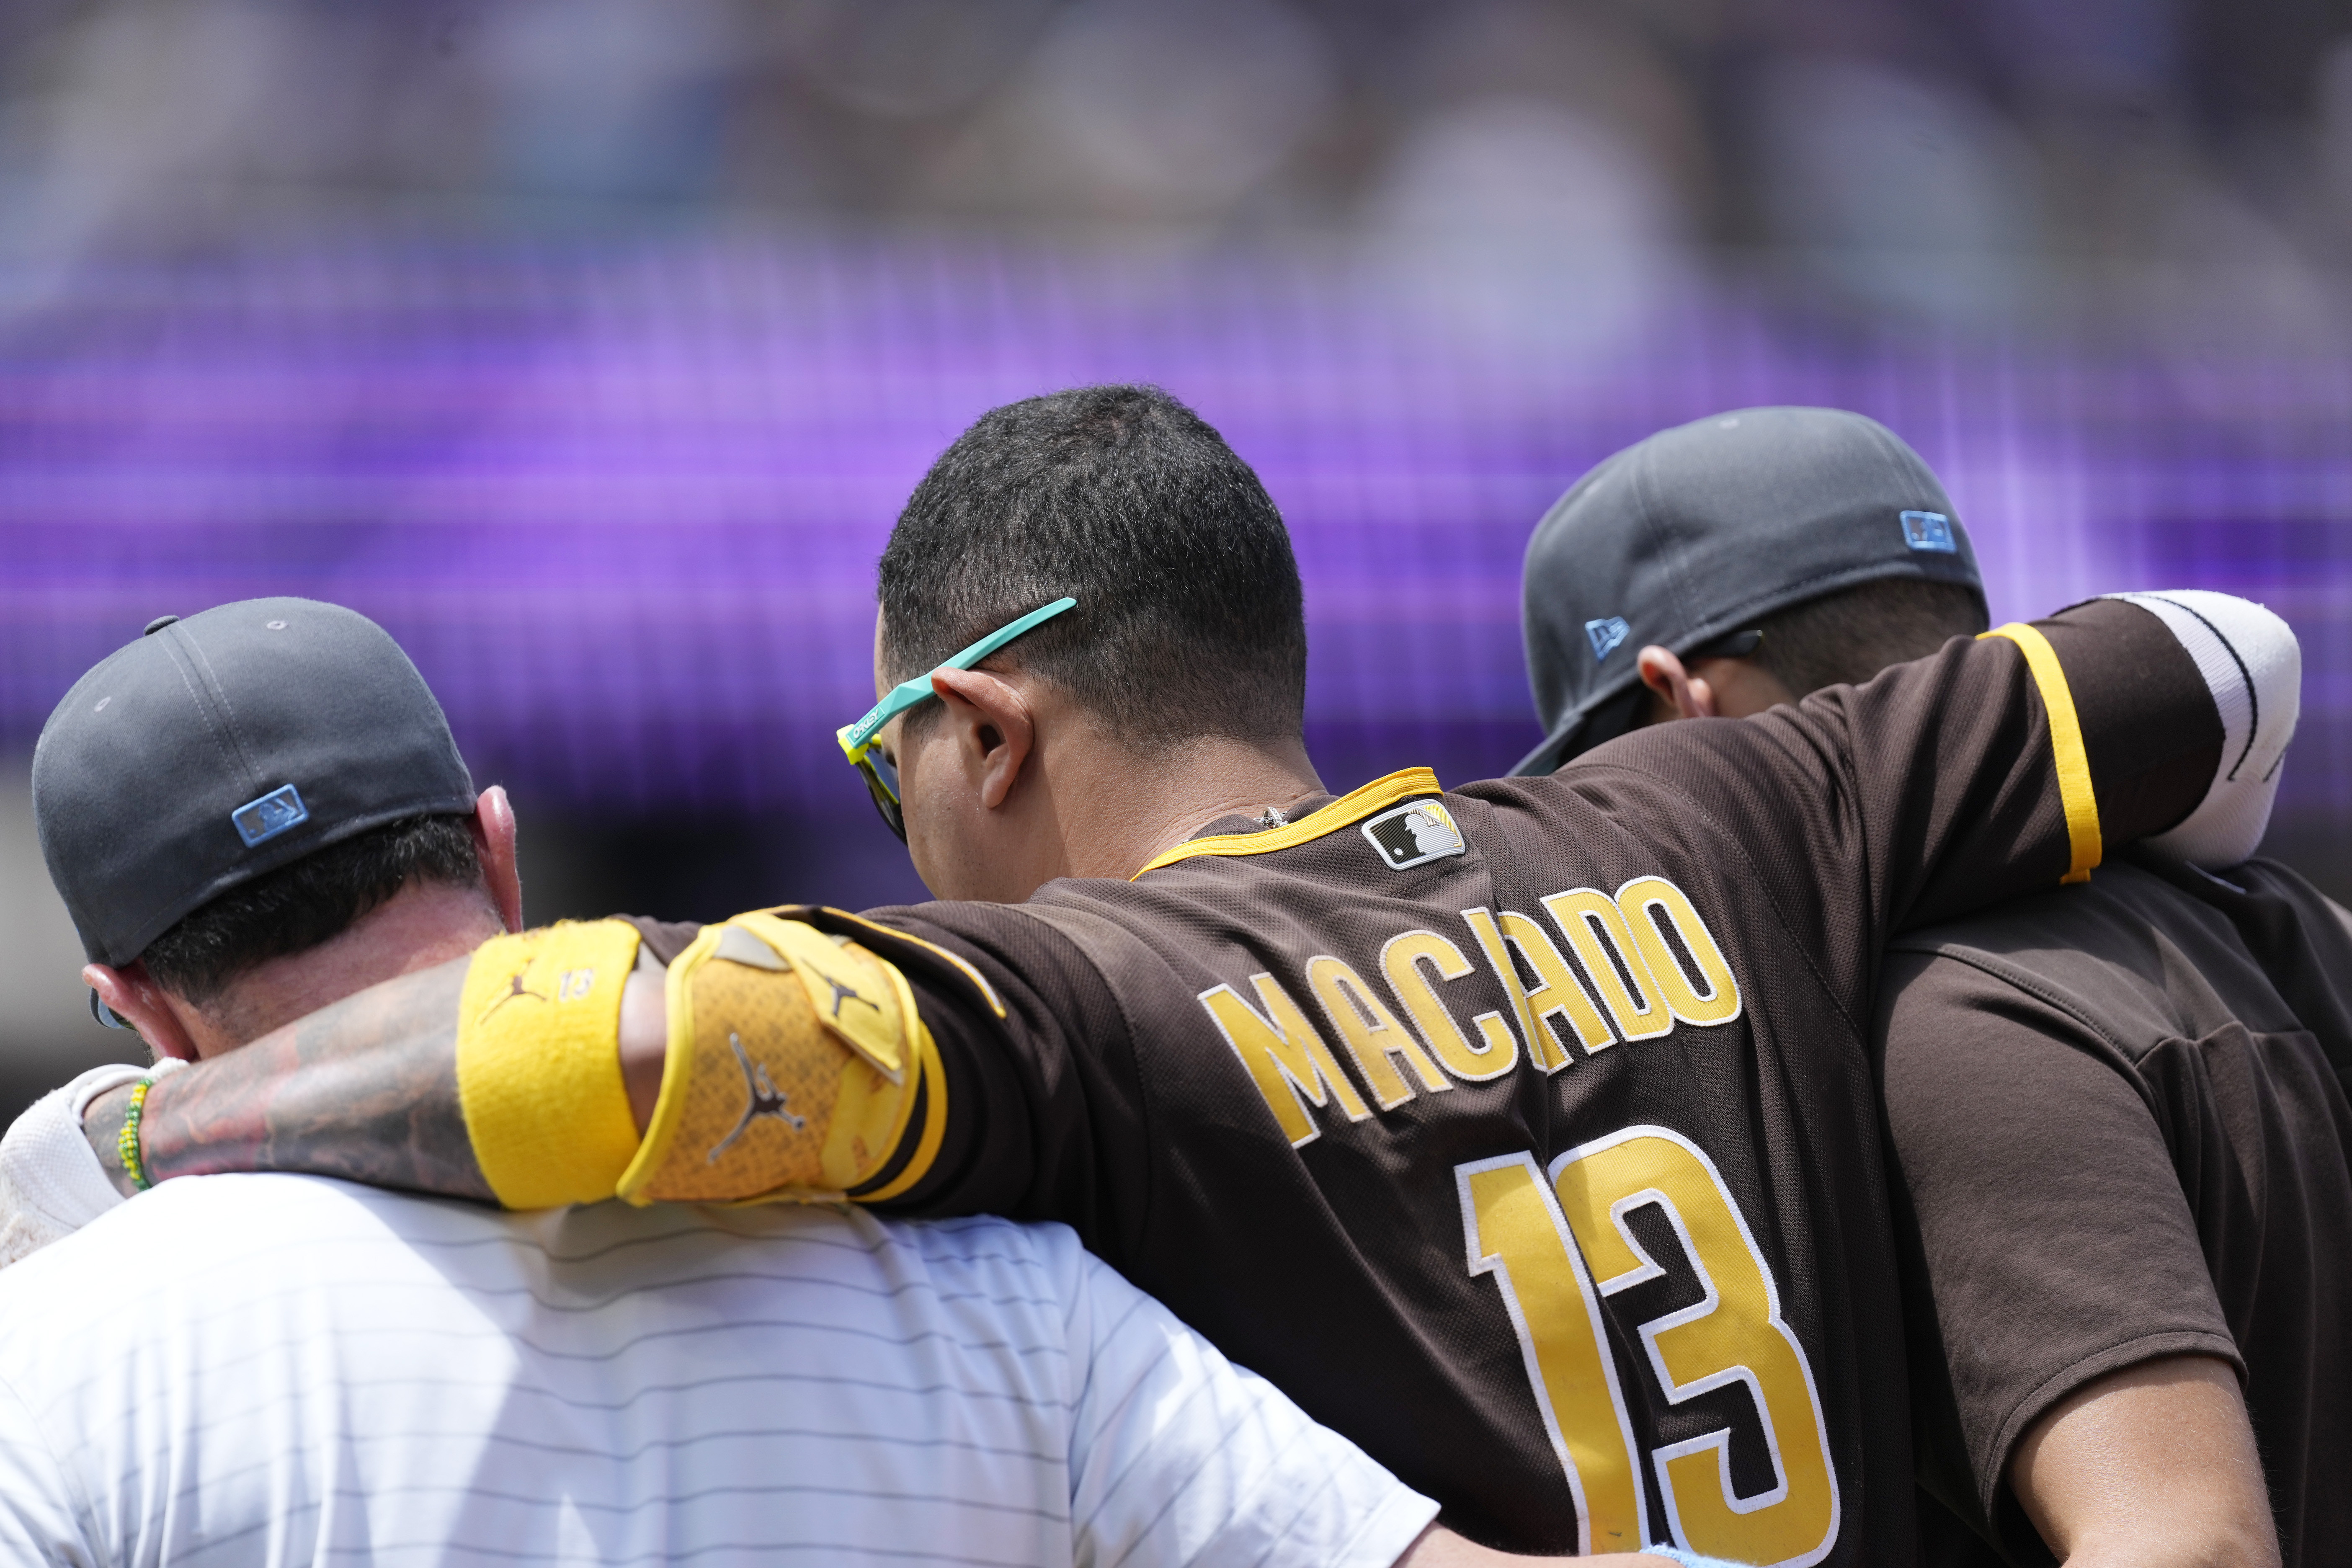 Pads stars Machado, Tatis say all's well after dugout dustup